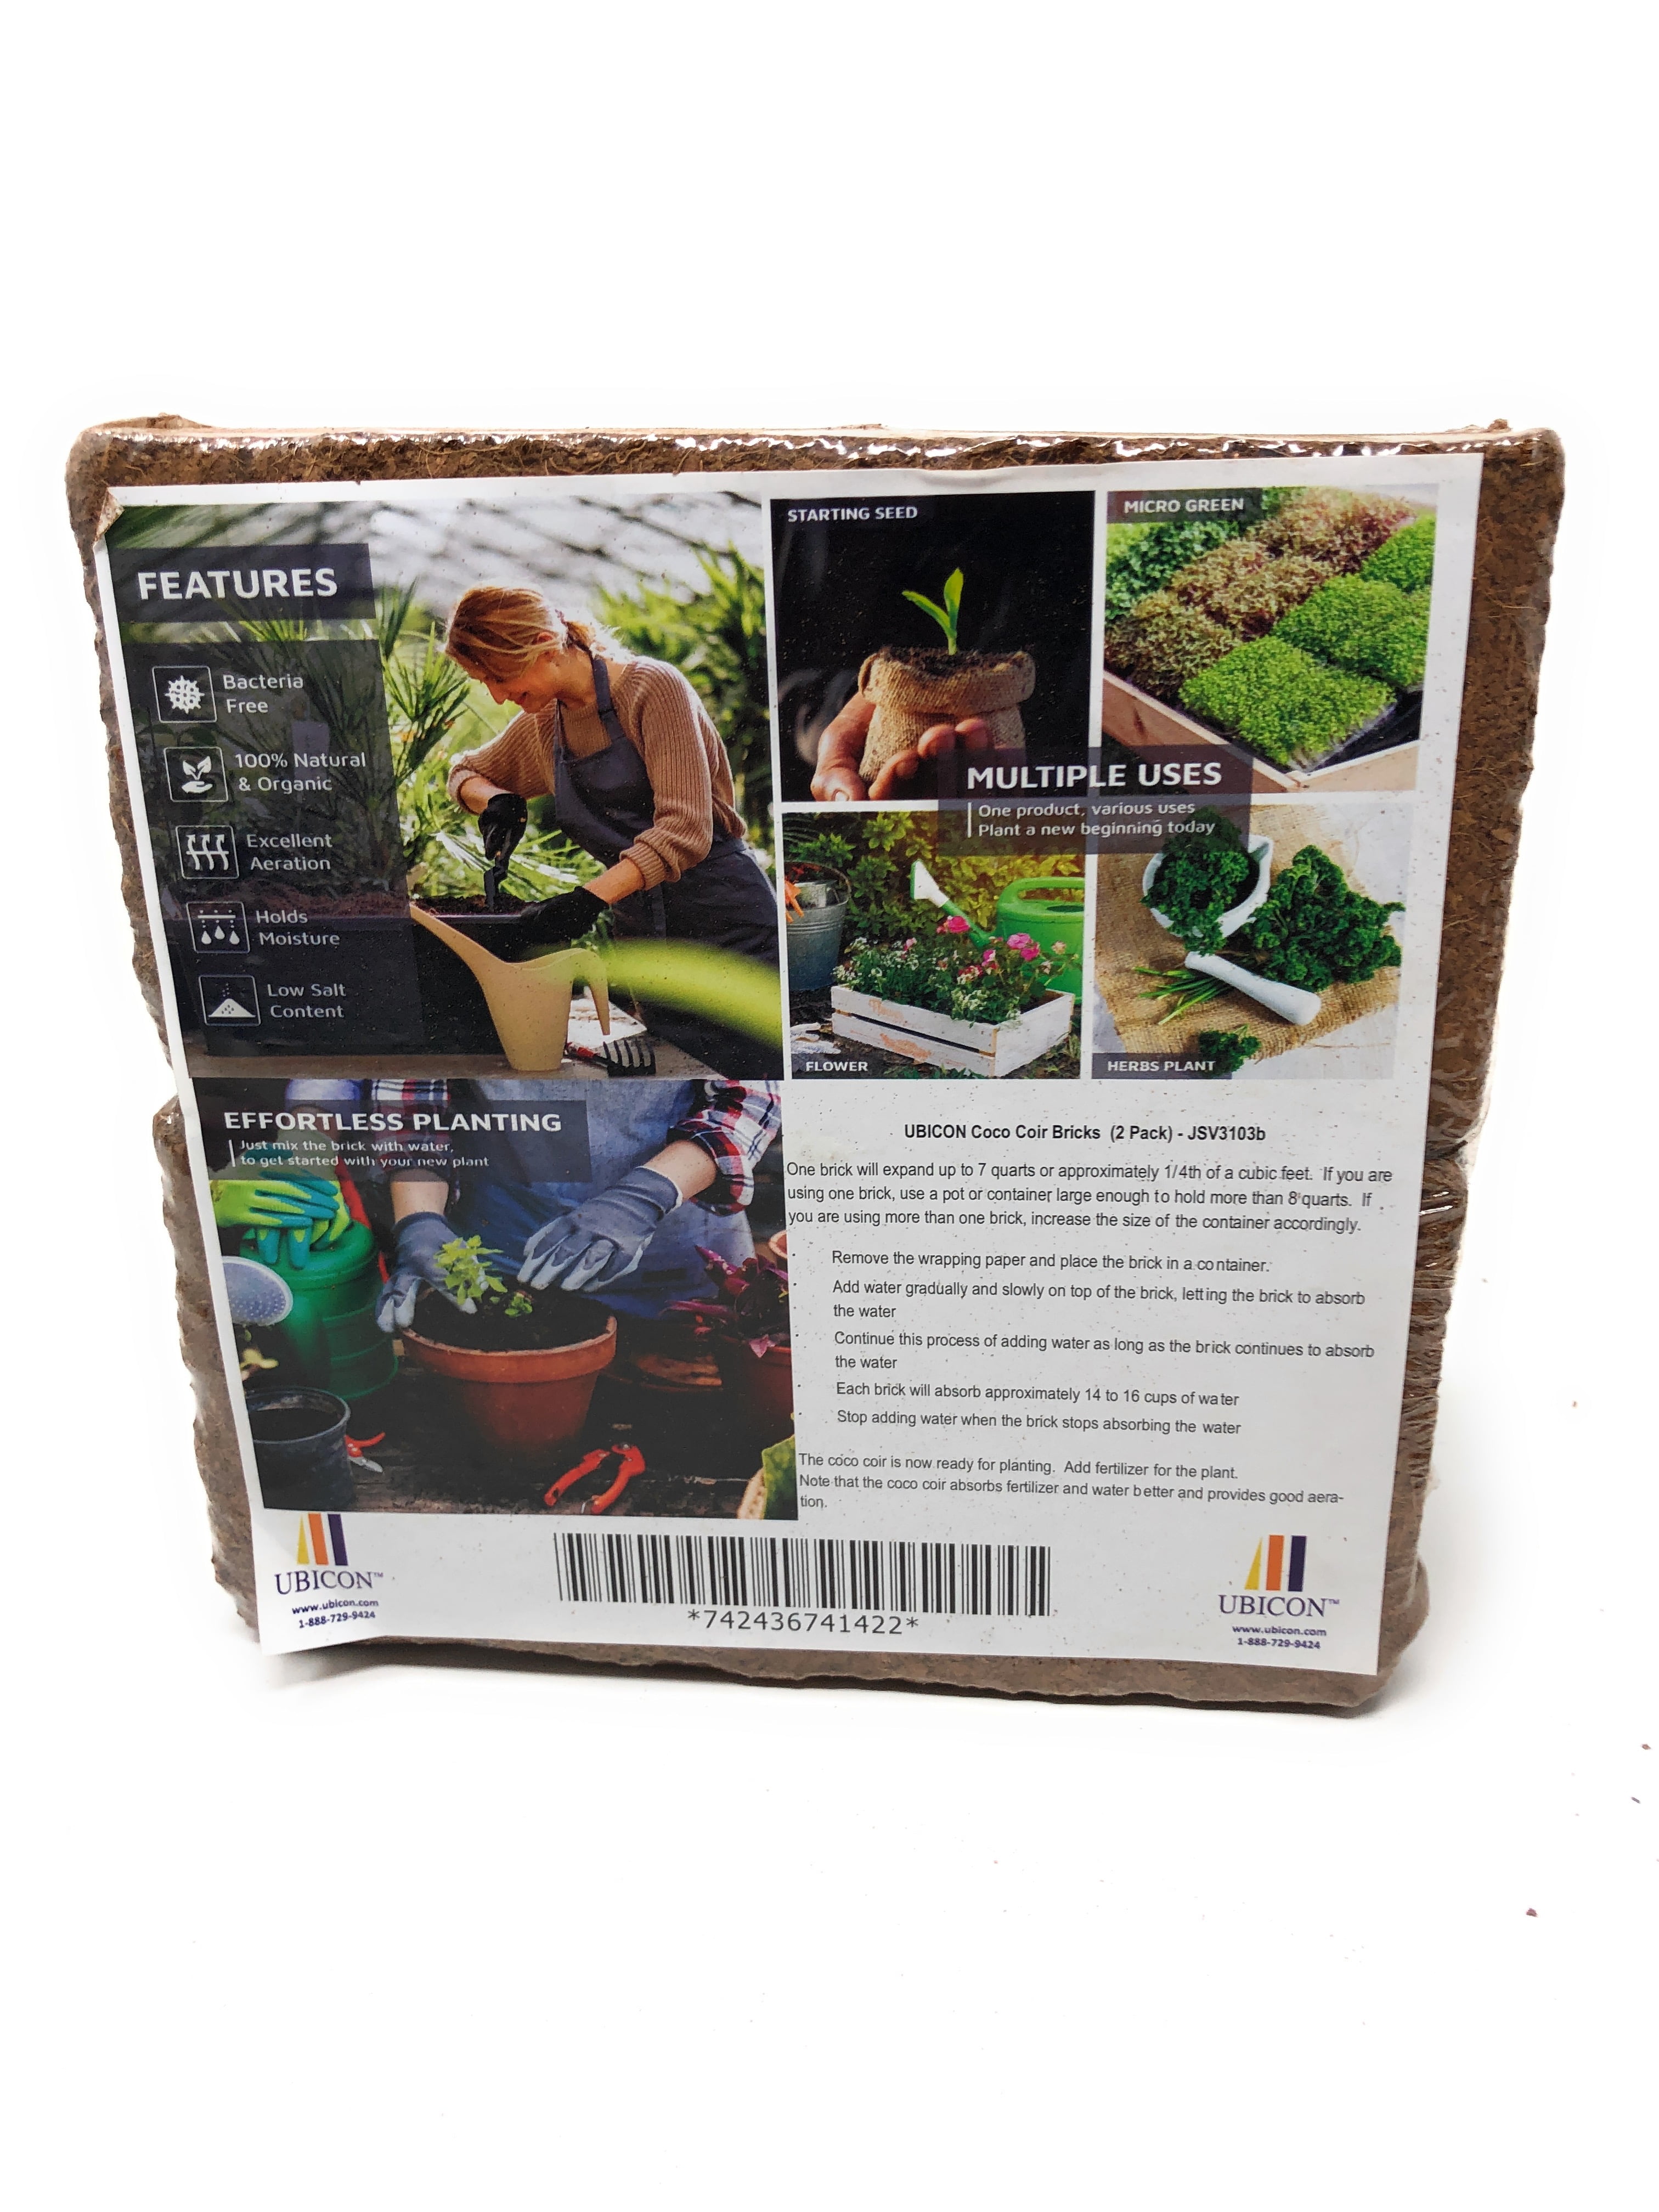 7 Pound Coconut Fiber Block Great Seed Bed 100% Organic & Eco-Friendly Premium Coco Coir Brick Perfect As Hydroponics Garden Soil Compressed Growing Medium 